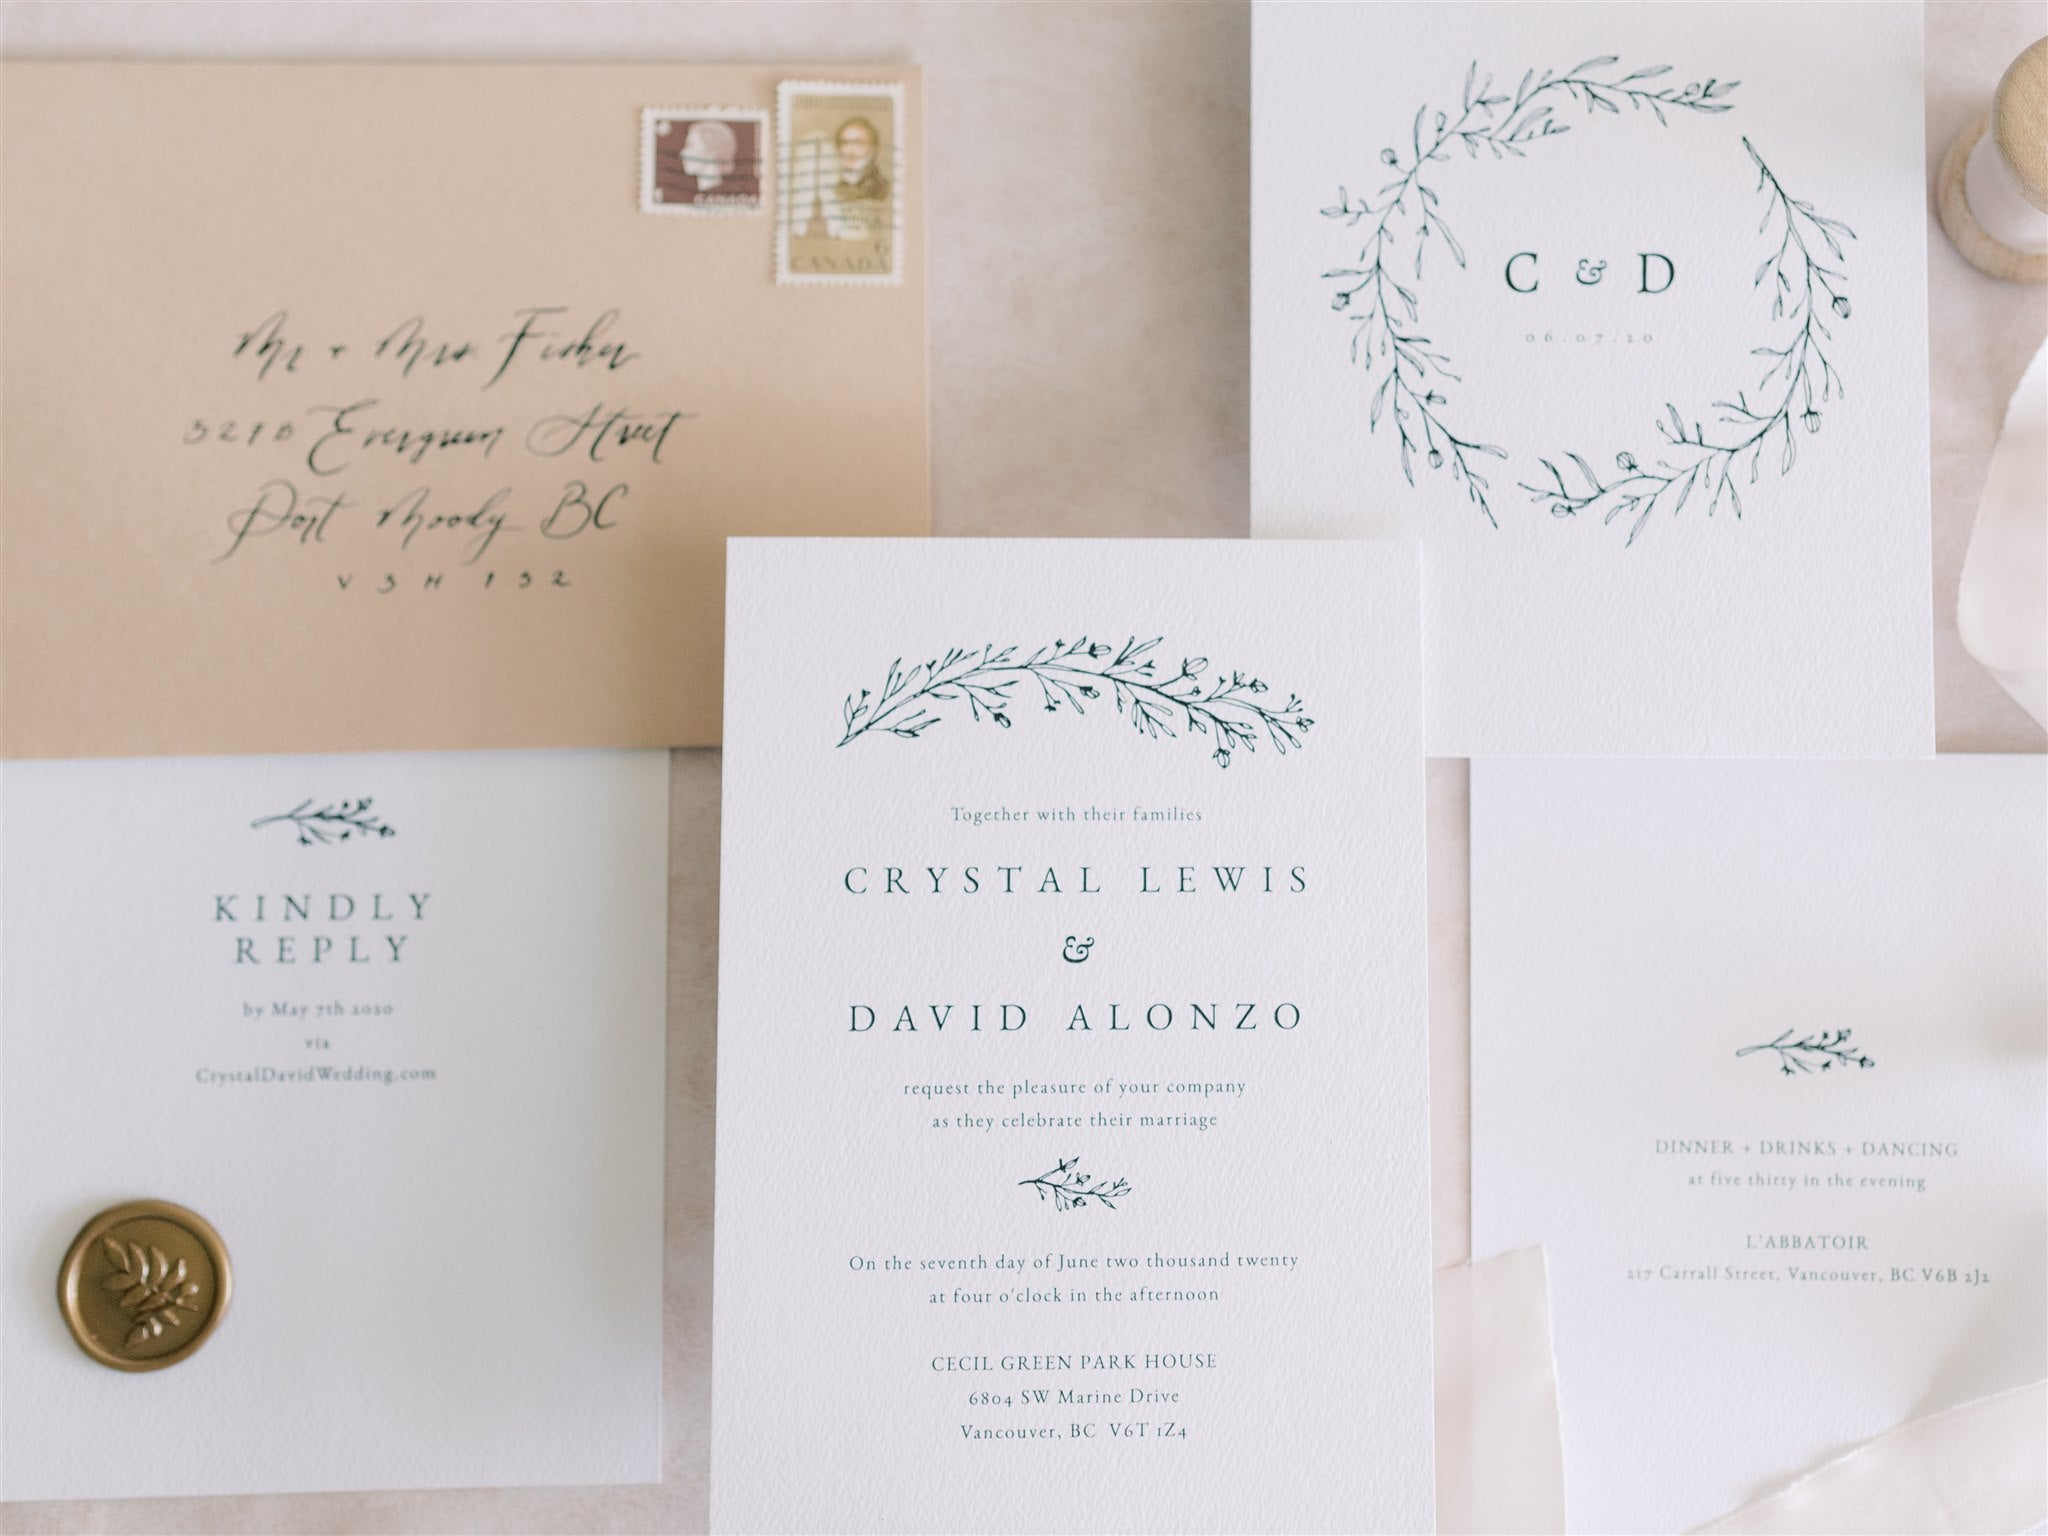 Minimalistic rustic wedding invitations by Papelu Studio from Vancouver, British Columbia. Photo by Vivian Wong Photography.